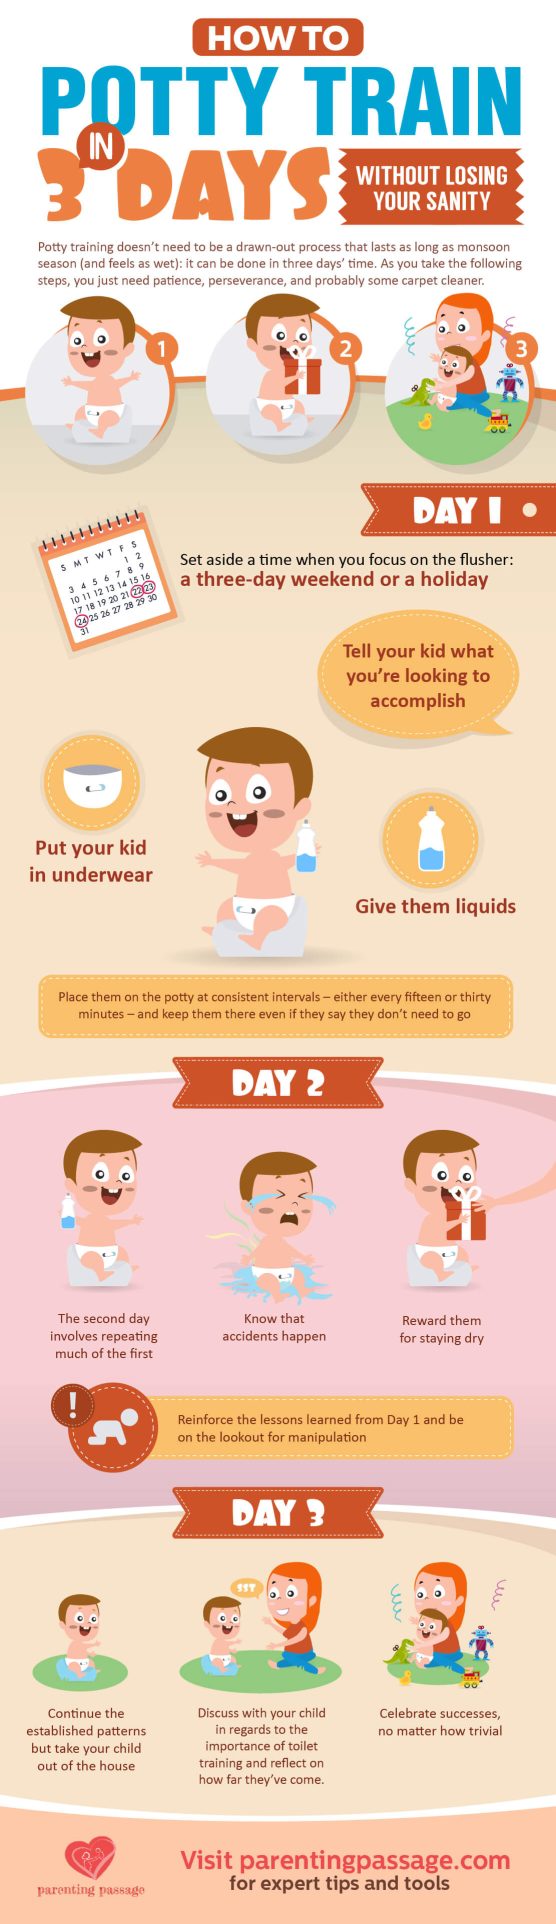 How to Potty Train in 3 Days without Losing Your Sanity